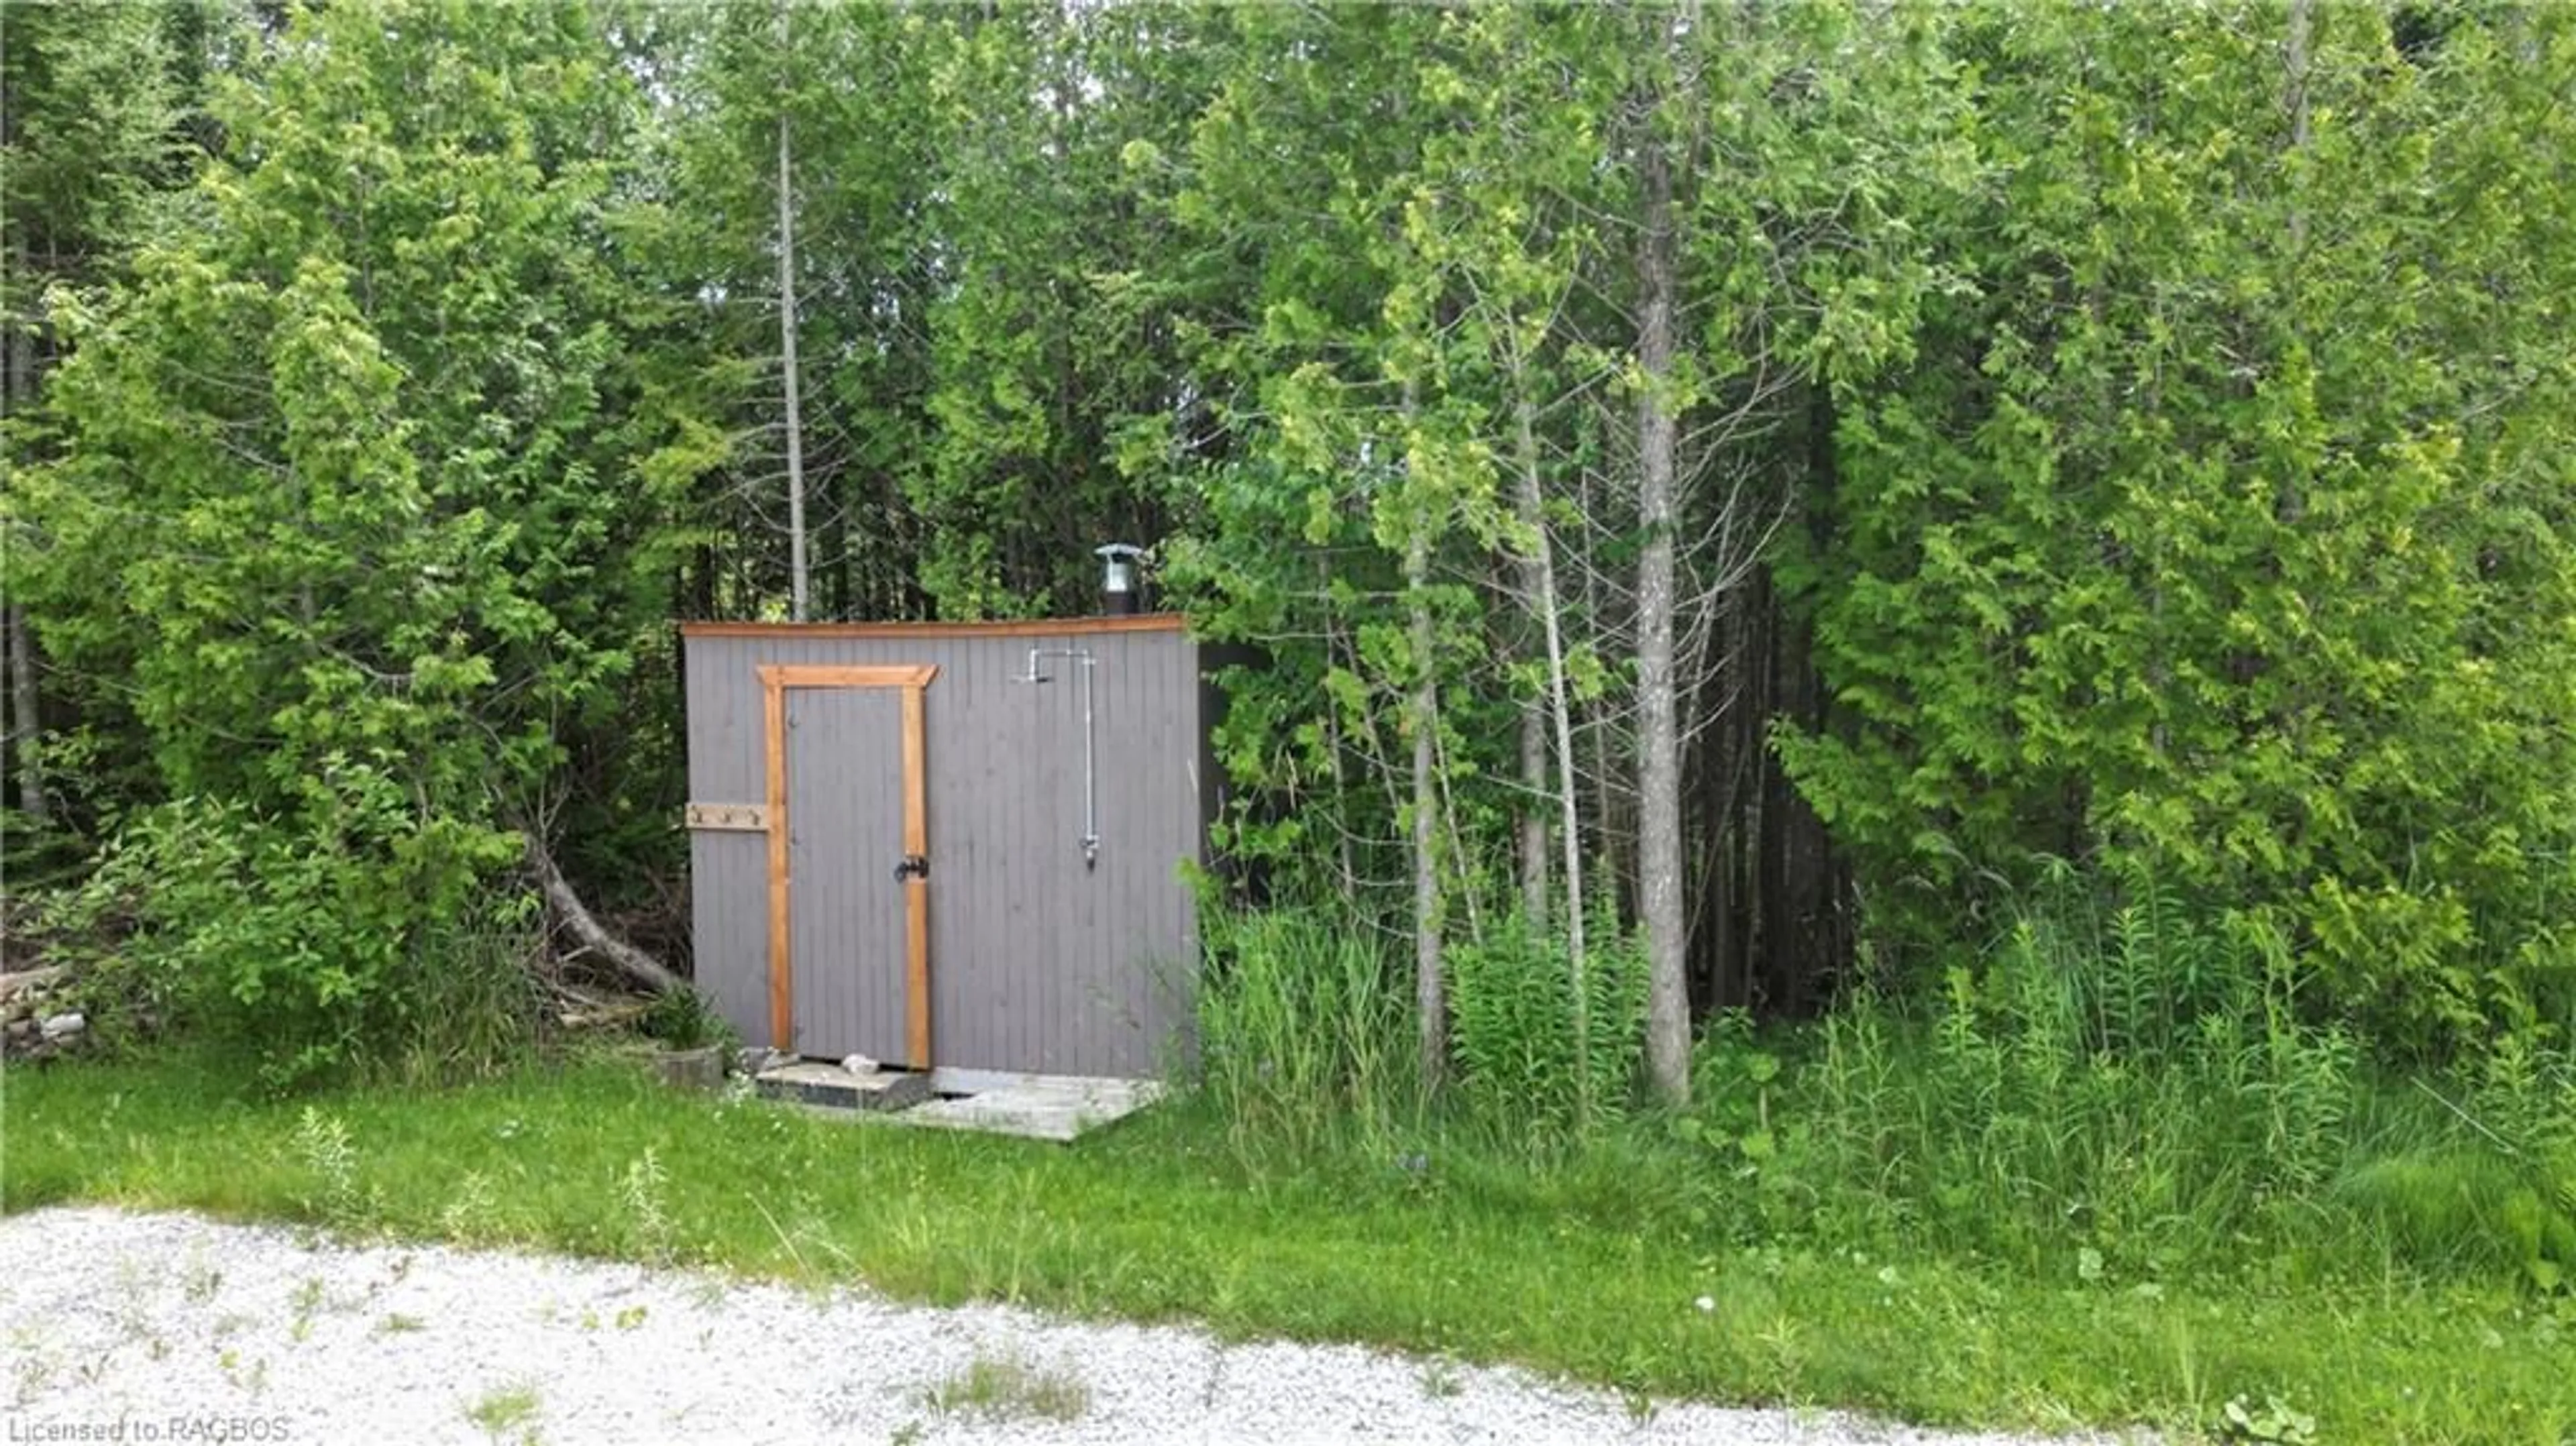 Shed for 73 Larsen Cove Rd, Northern Bruce Peninsula Ontario N0H 1Z0